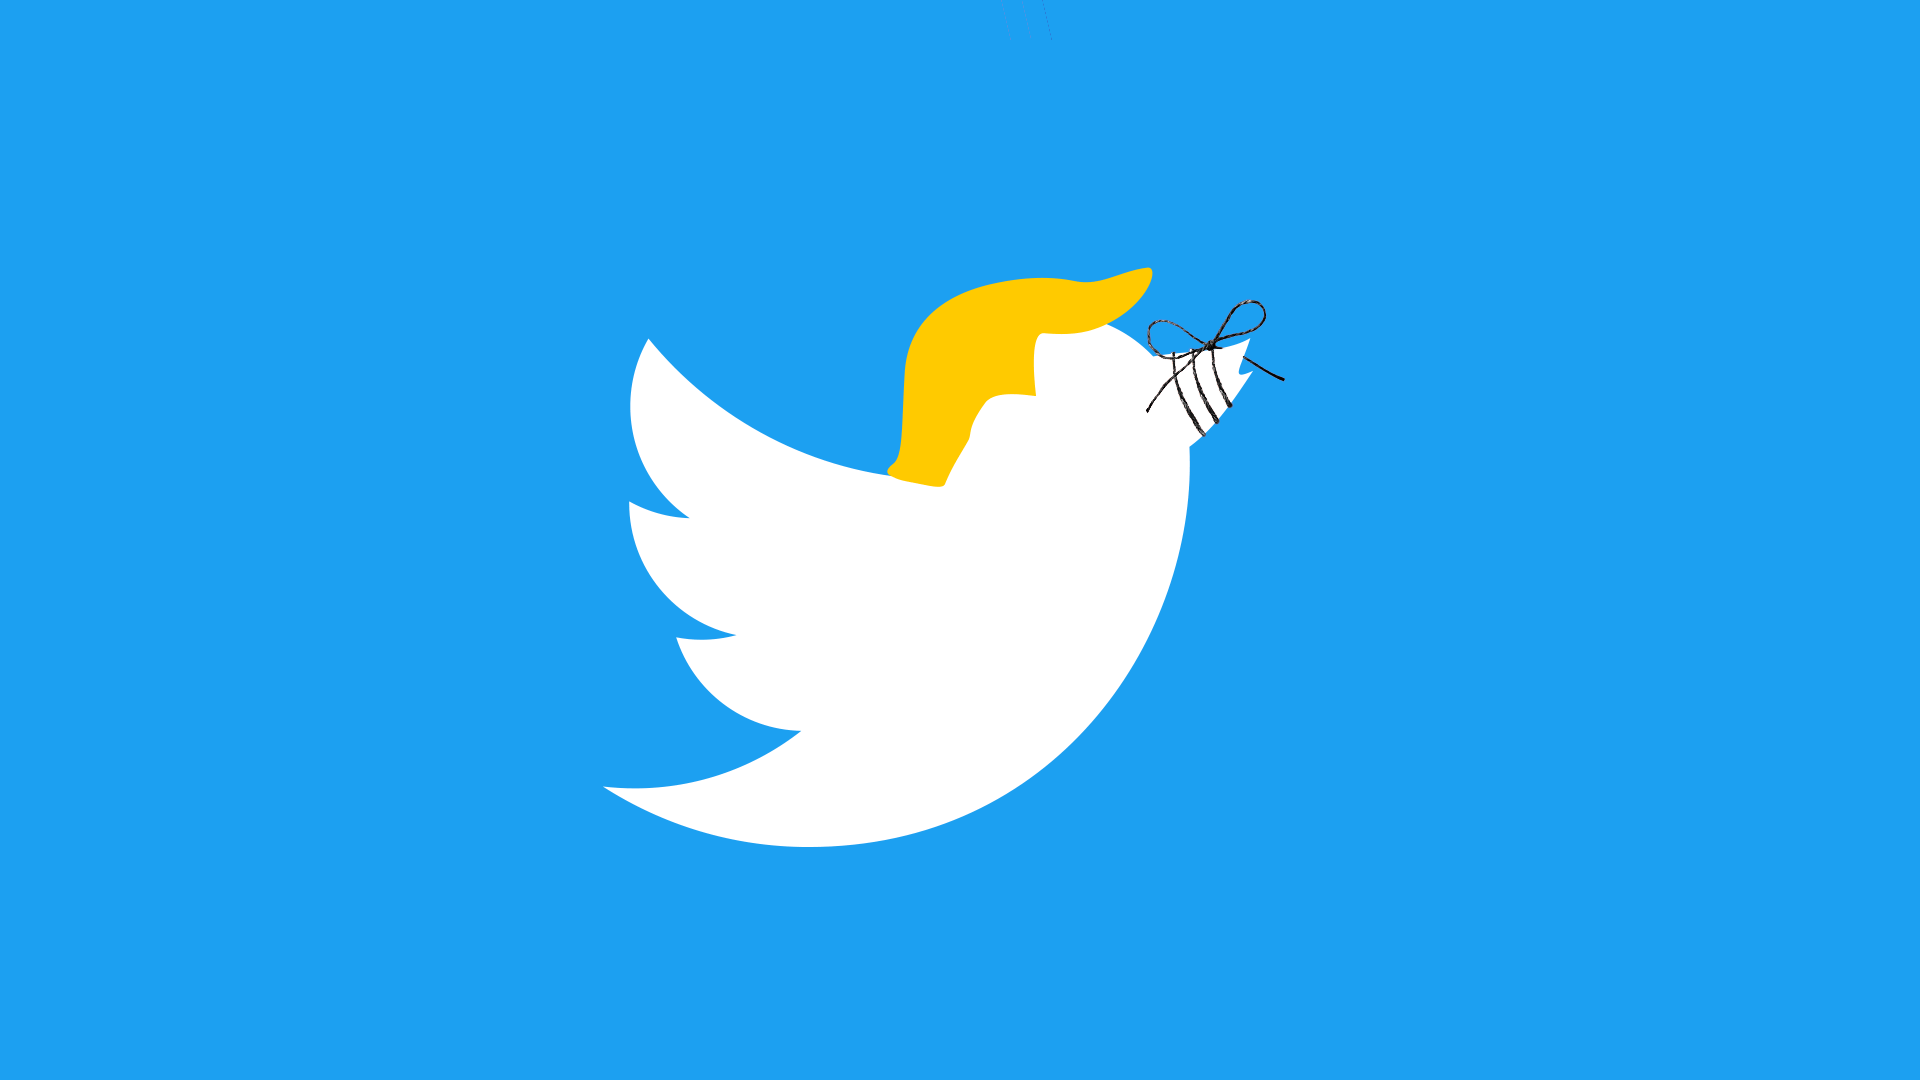 Illustration of a Twitter bird with President Trump's hair and a string tied around it's beak. 